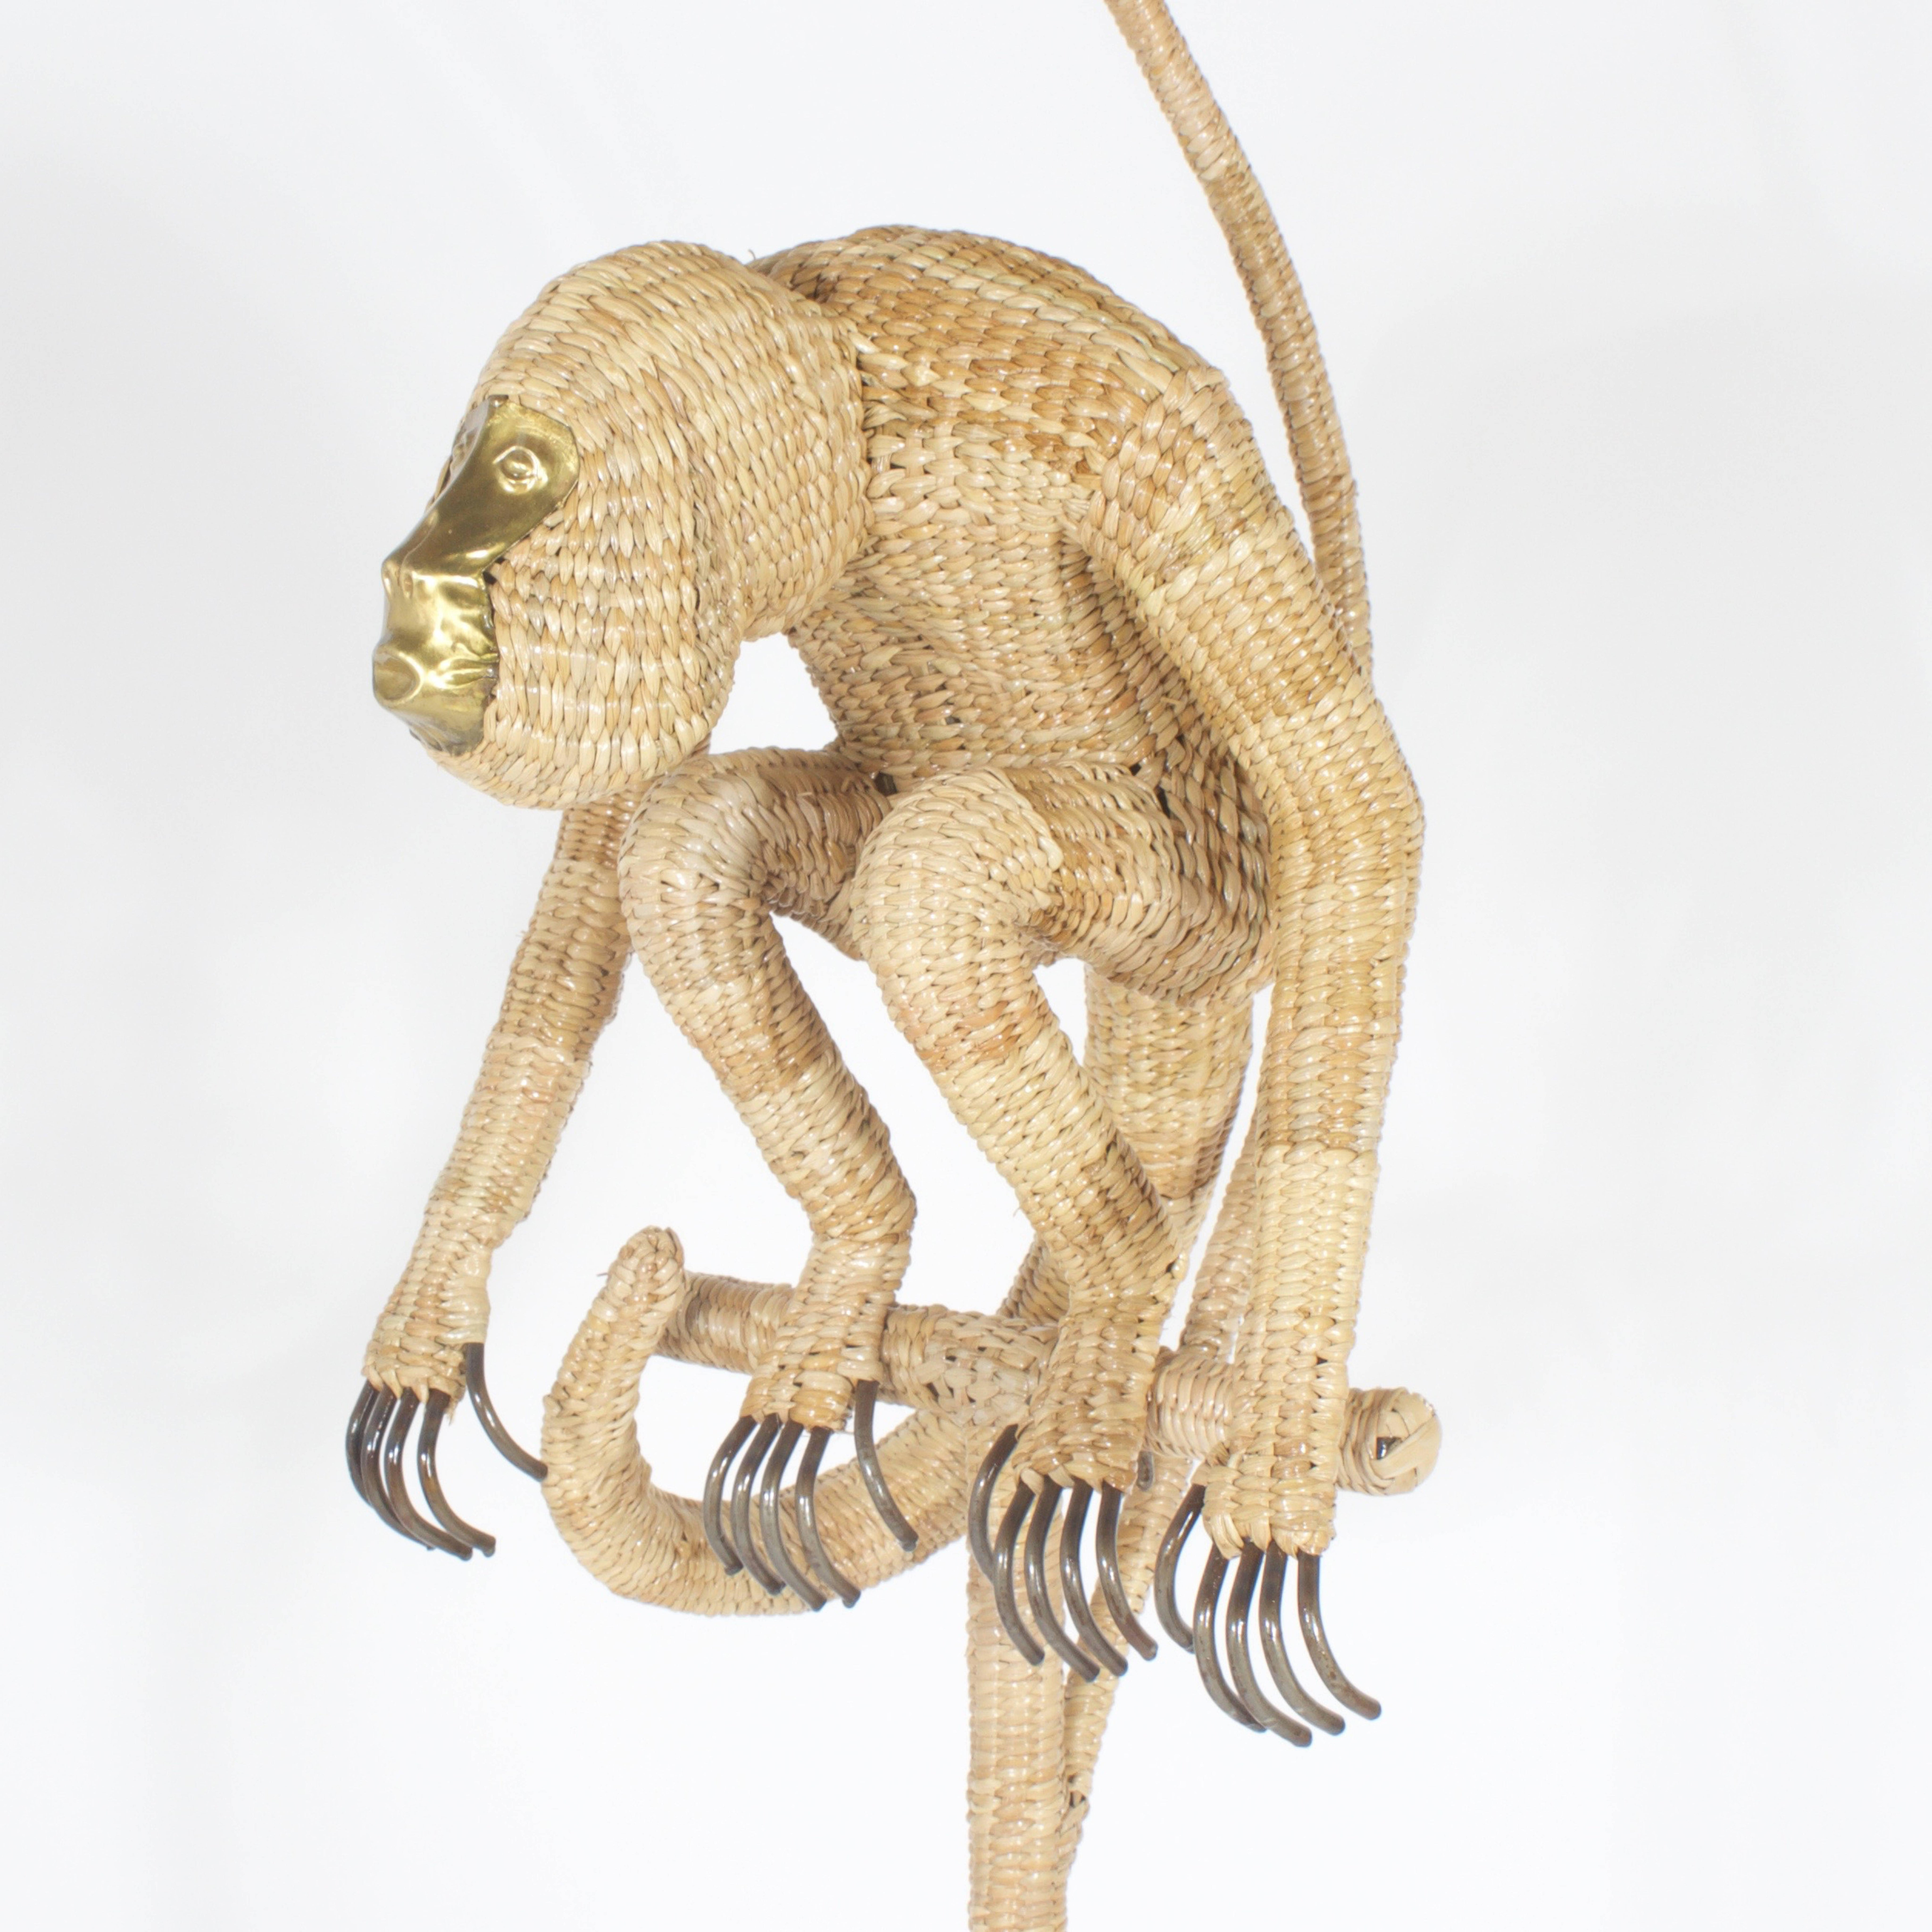 Mario Torres floor lamp constructed of a metal frame wrapped with wicker or reed in tightly woven pattern on organic neutral color. Featuring a matching wicker shade over and ready for action, long tailed monkey with a brass face and metal fingers